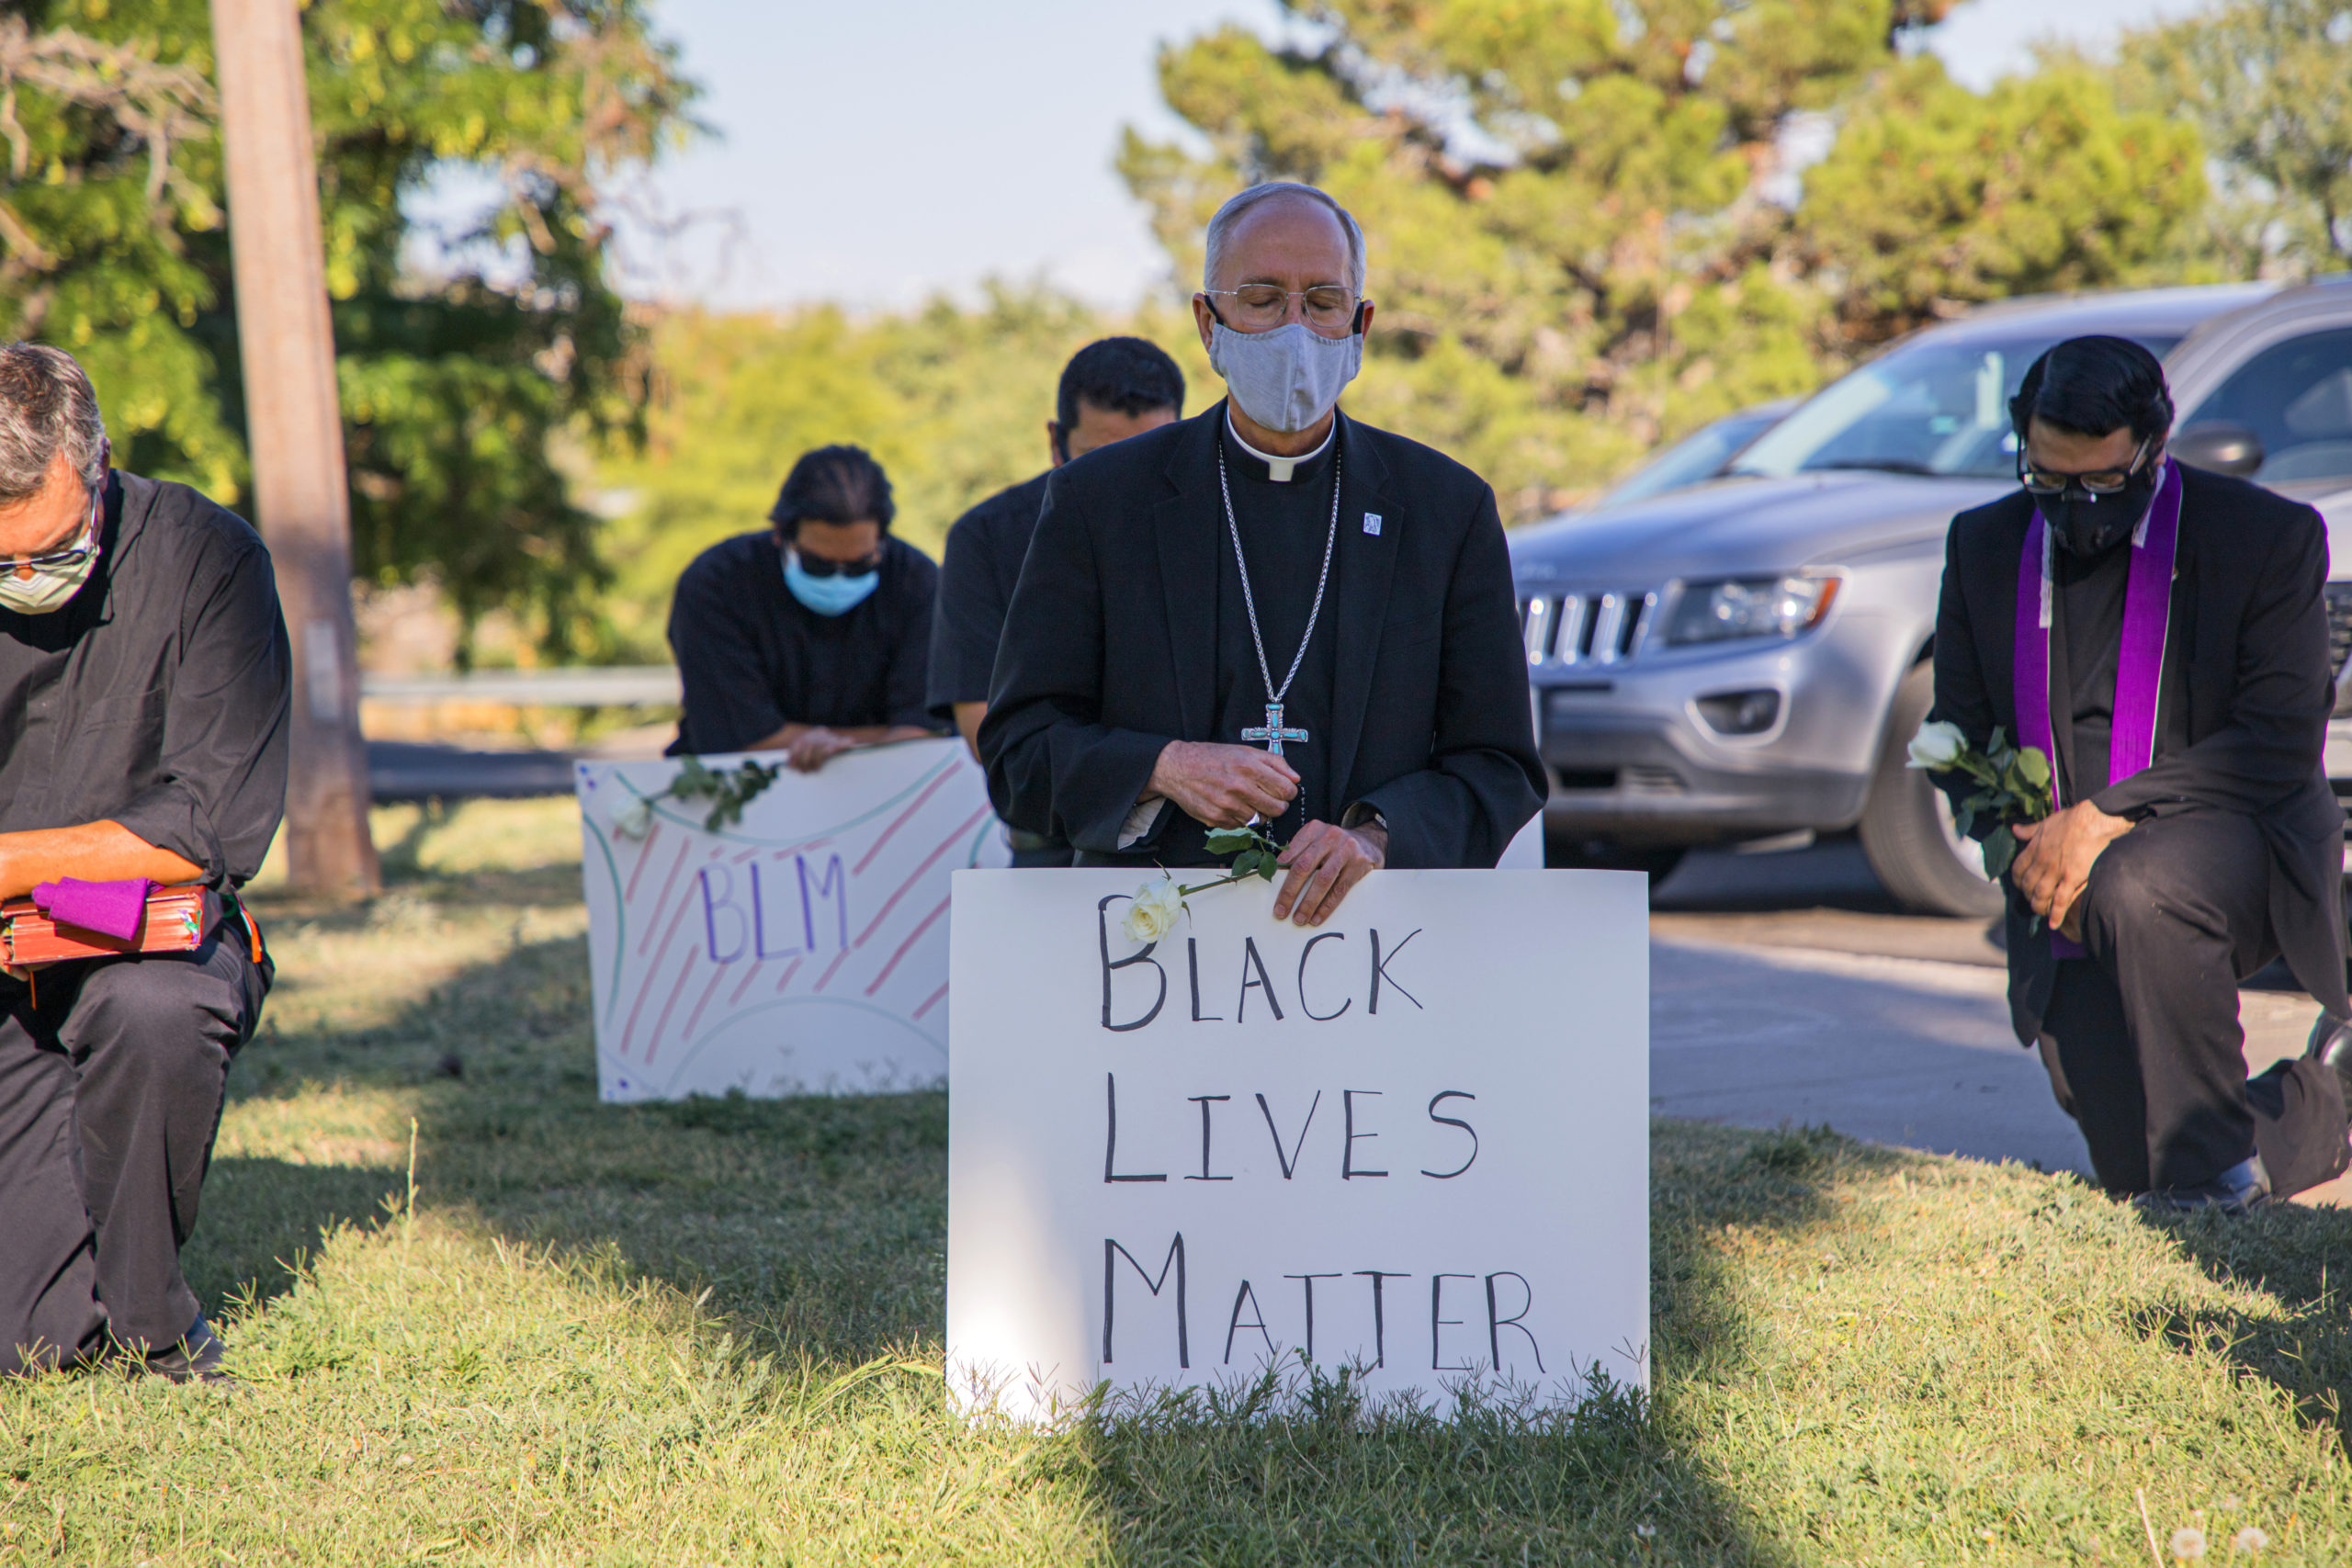 In this June 1, 2020, photo provided by the Catholic Diocese of El Paso, Bishop Mark Seitz, center, kneels with other demonstrators at Memorial Park holding a Black Lives Matter sign in El Paso, Texas. Pope Francis called Seitz unexpectedly after he was photographed at the protest. (Fernie Ceniceros/Catholic Diocese of El Paso via AP)